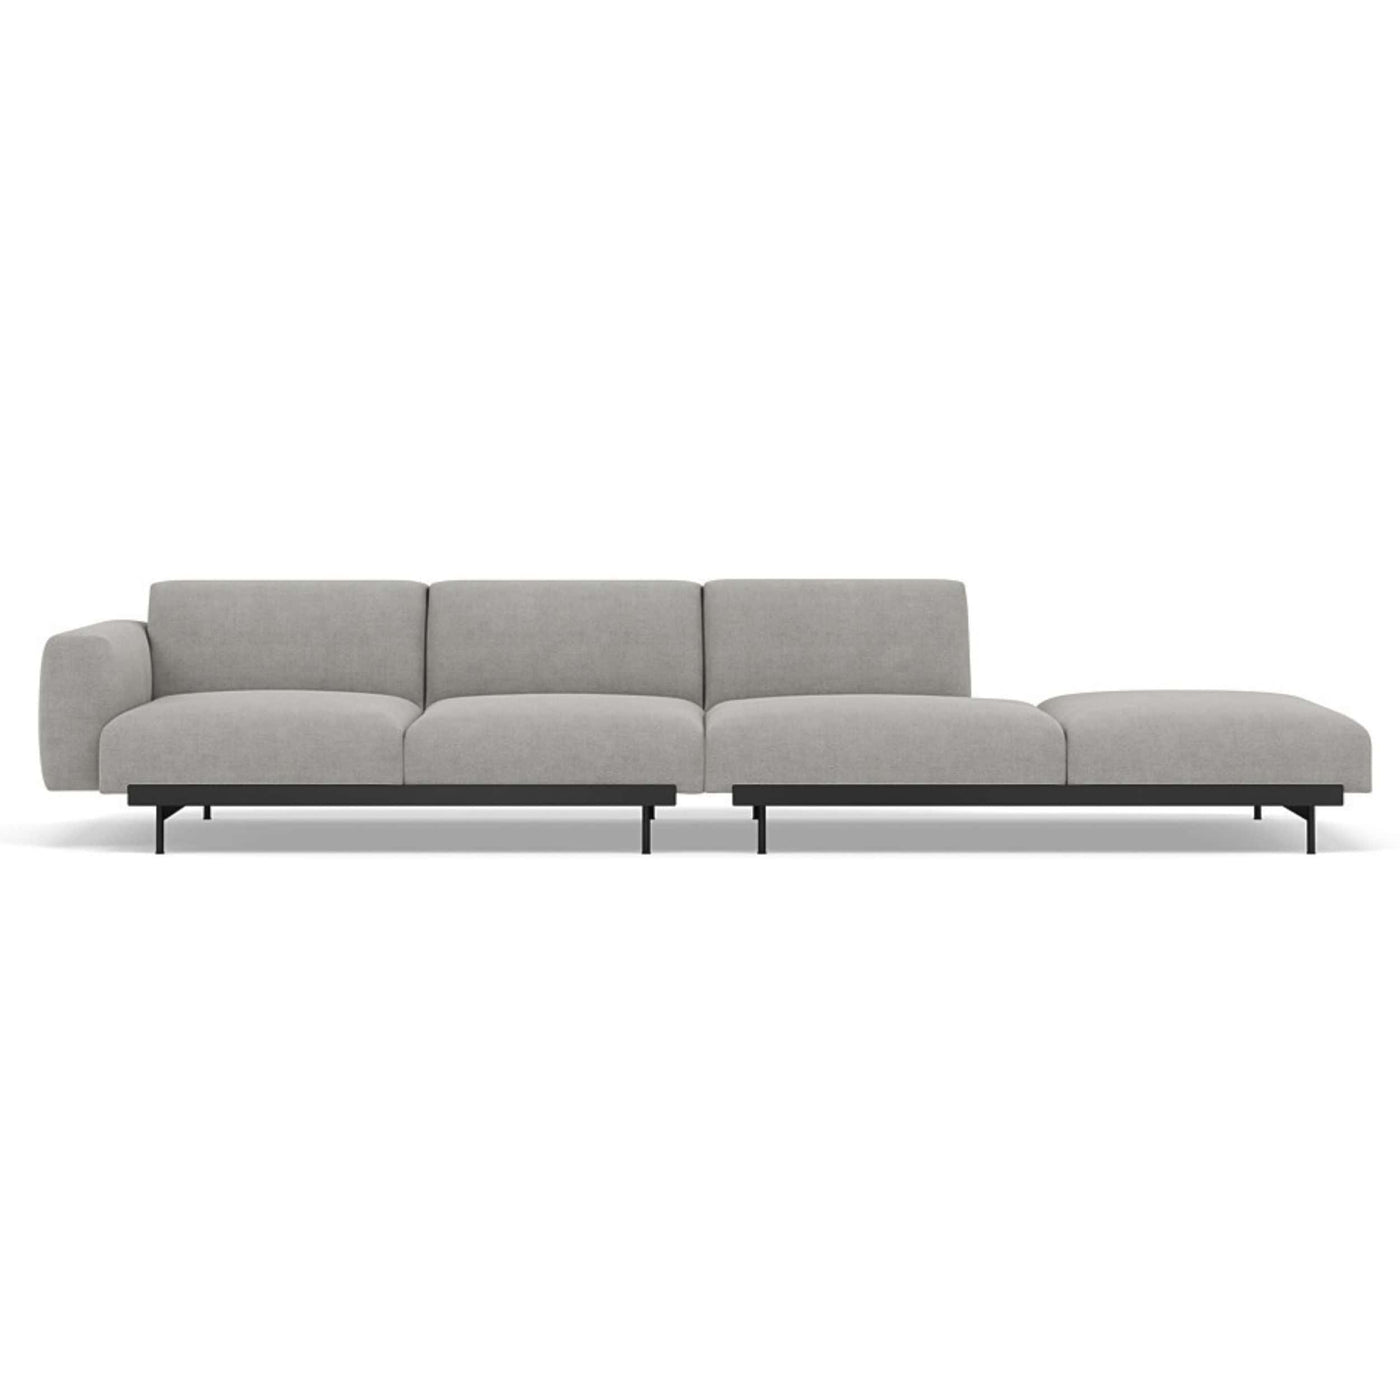 Muuto In Situ Modular 4 Seater Sofa configuration 2. Made to order from someday designs. #colour_fiord-151